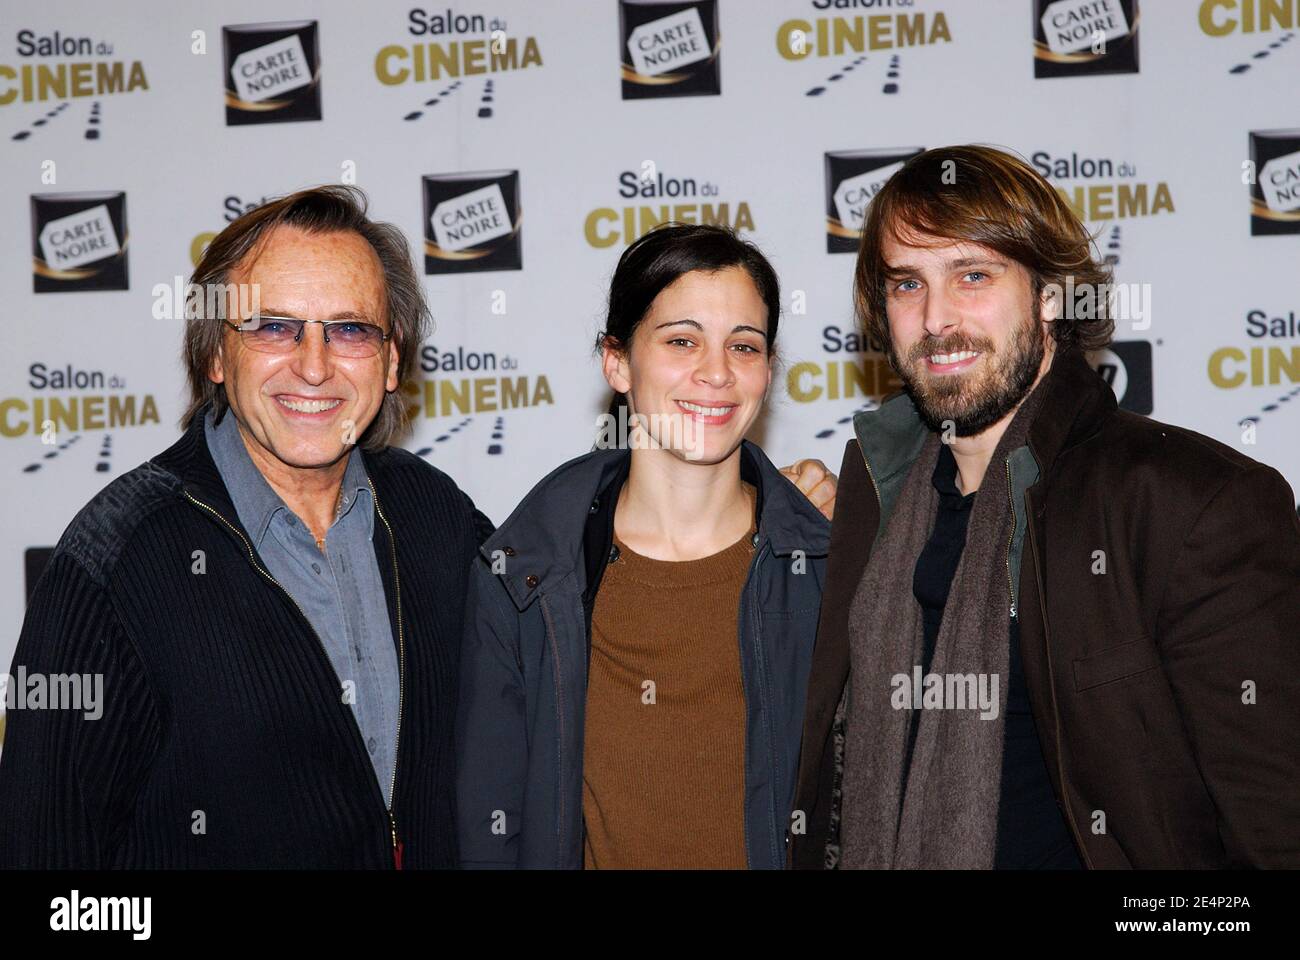 Alexandre Arcady poses with his son Director Alexandre Aja and his wife during the 2nd Salon du Cinema held at the Porte de Versailles in Paris, France on January 20, 2008. Photo by Helder Januario/ABACAPRESS.COM Stock Photo